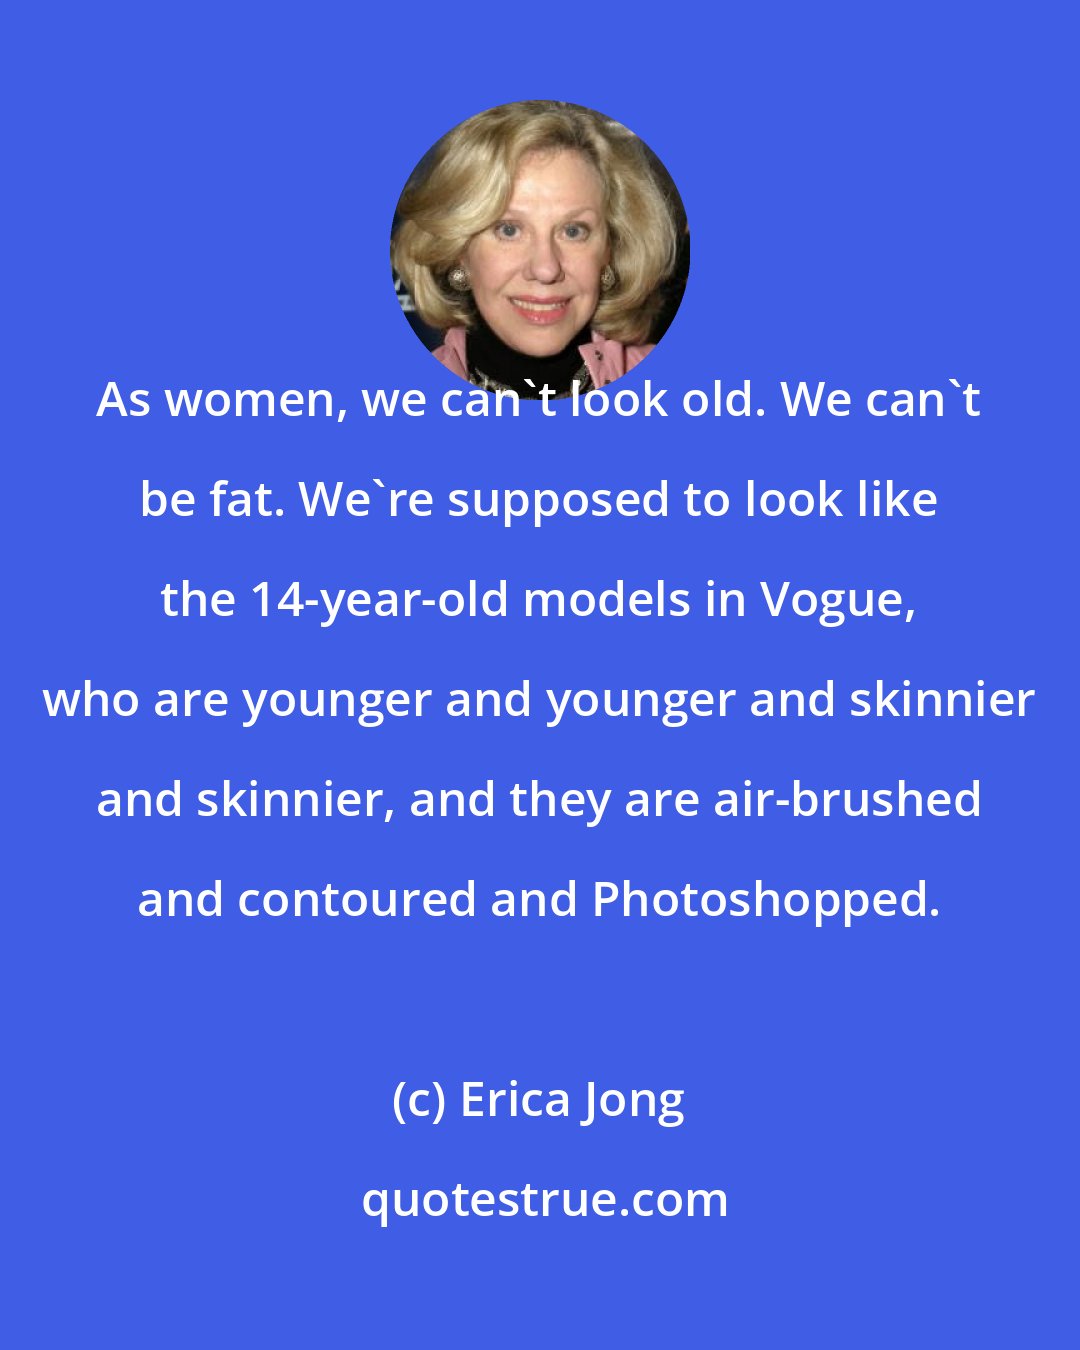 Erica Jong: As women, we can't look old. We can't be fat. We're supposed to look like the 14-year-old models in Vogue, who are younger and younger and skinnier and skinnier, and they are air-brushed and contoured and Photoshopped.